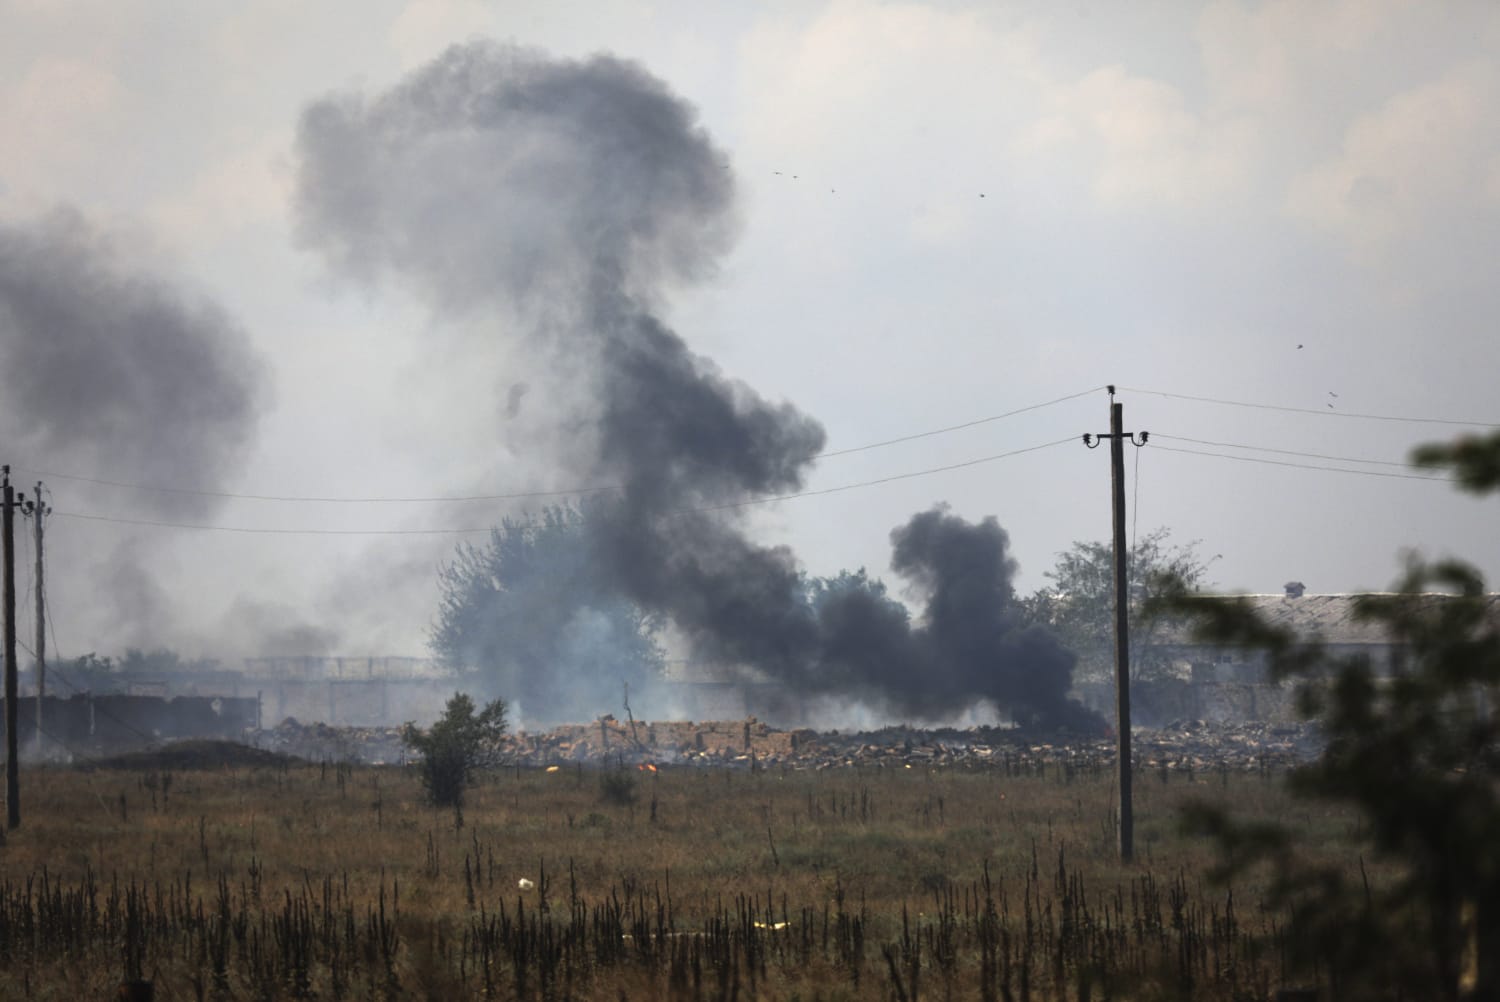 Russian military sites in Crimea keep exploding, hinting at an ambitious Ukrainian offensive